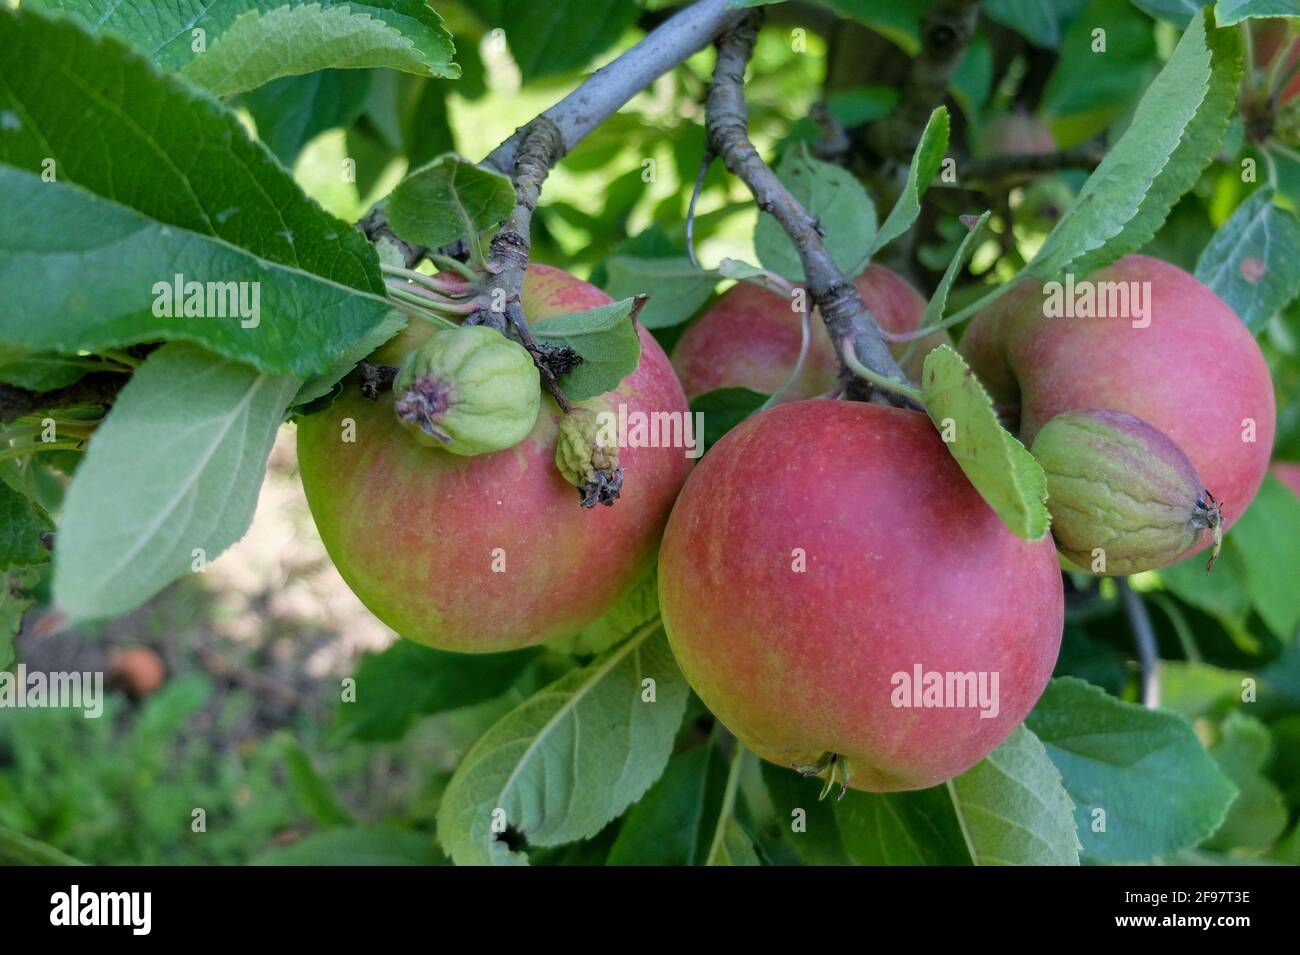 Too many fruits on fruit set, apple fall in June (Malus domestica) Stock Photo